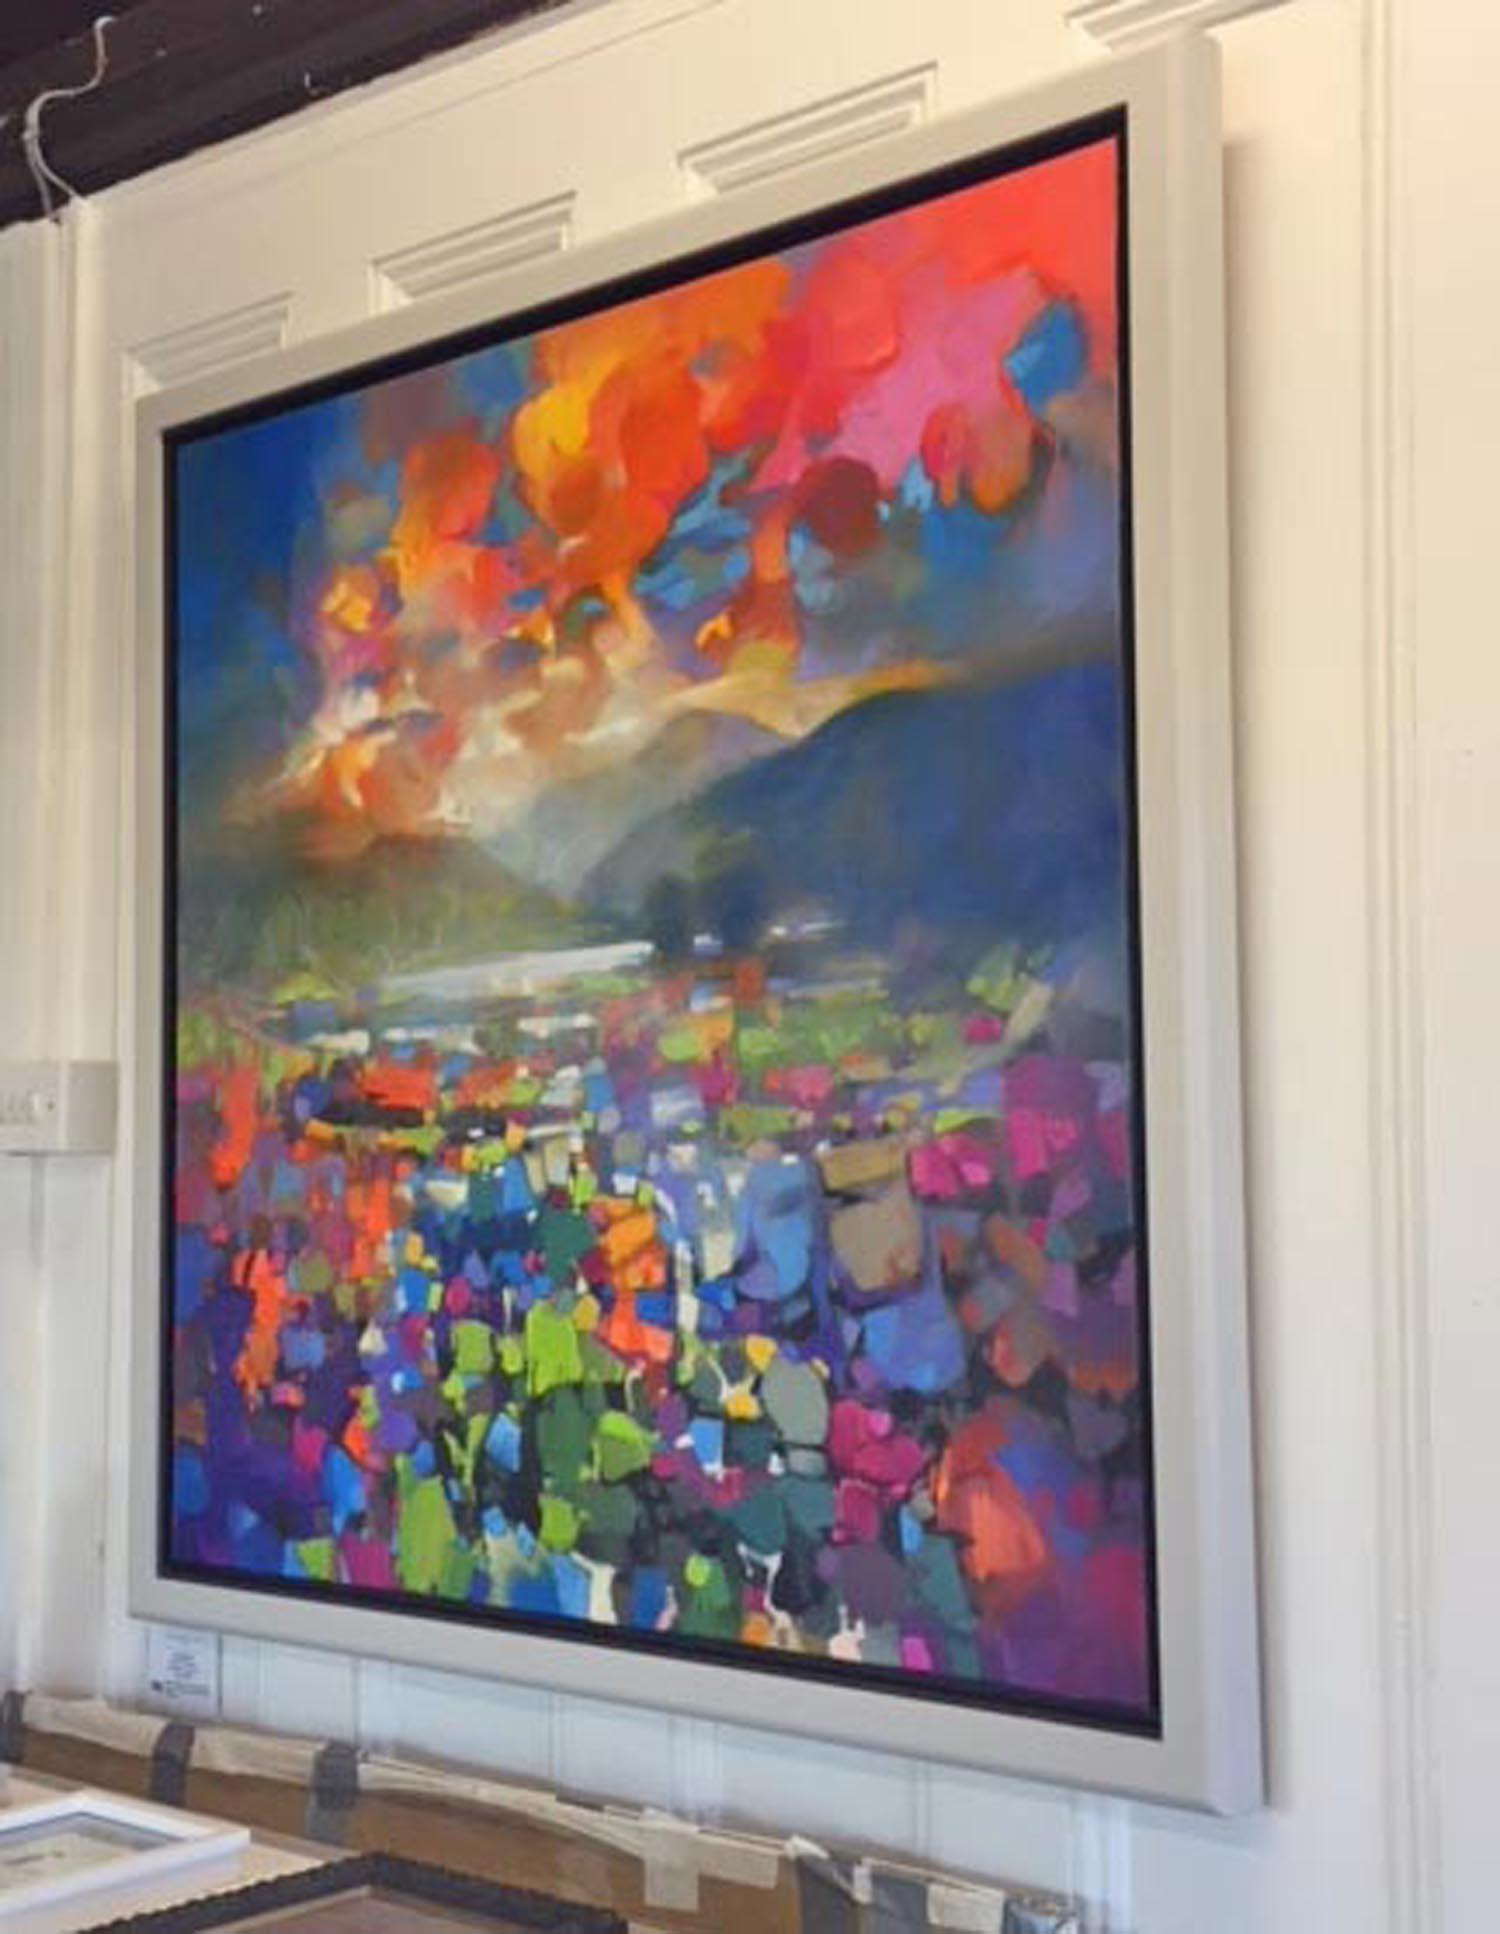 Highland Resonance by Scottish artist Scott Naismith. Framed and ready to hang .

This large mixed media painting including oil, acrylic and spray paint on a linen canvas features a vibrant and colourful depiction of an abstracted version of the